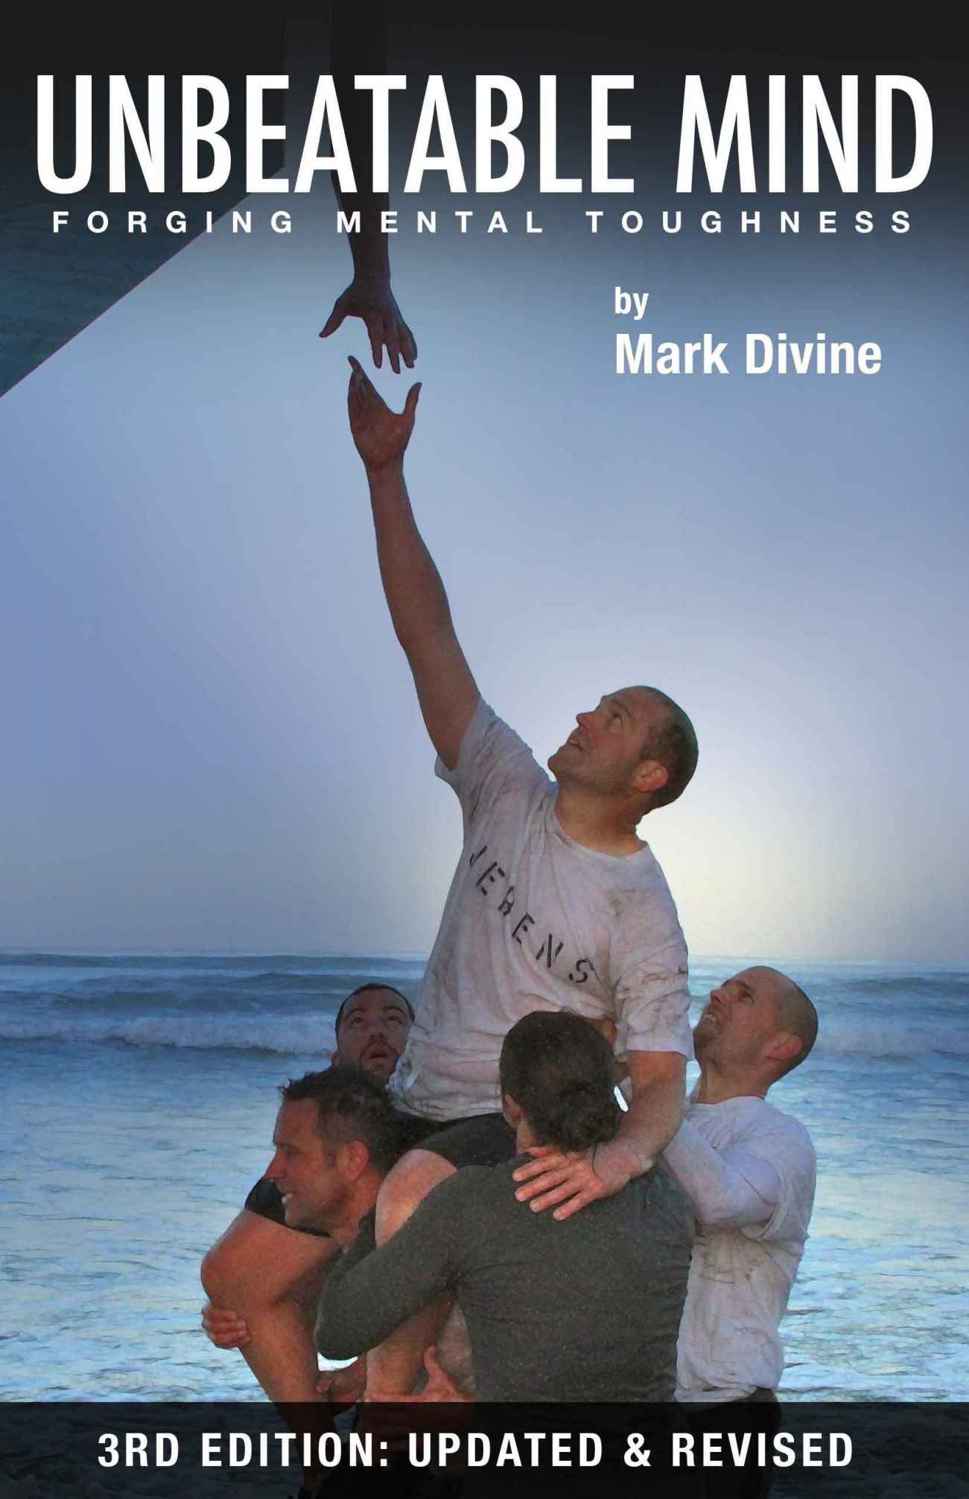 Forge Resiliency and Mental Toughness to Succeed at an Elite Level Mark Divine - photo 1